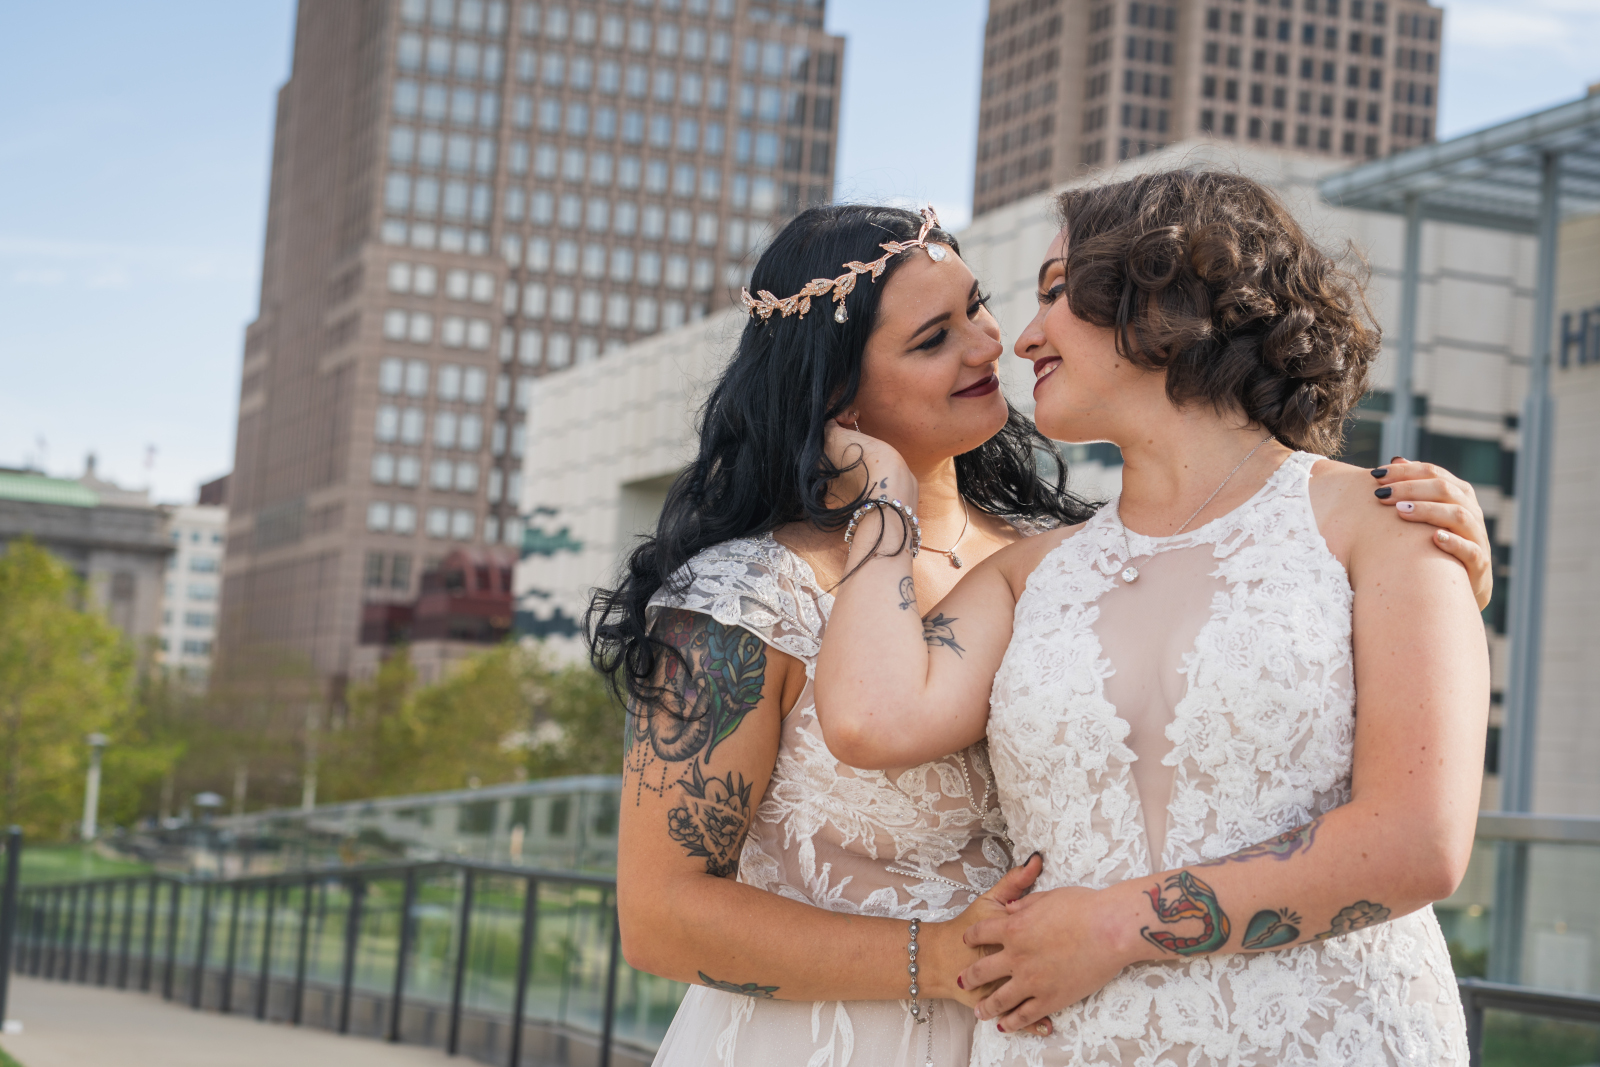 Two brides wedding portrait, beautiful, urban, smile, romantic, two wedding dresses, bridal crown, love is love, beautiful lesbian wedding at the House of Blues, downtown Cleveland